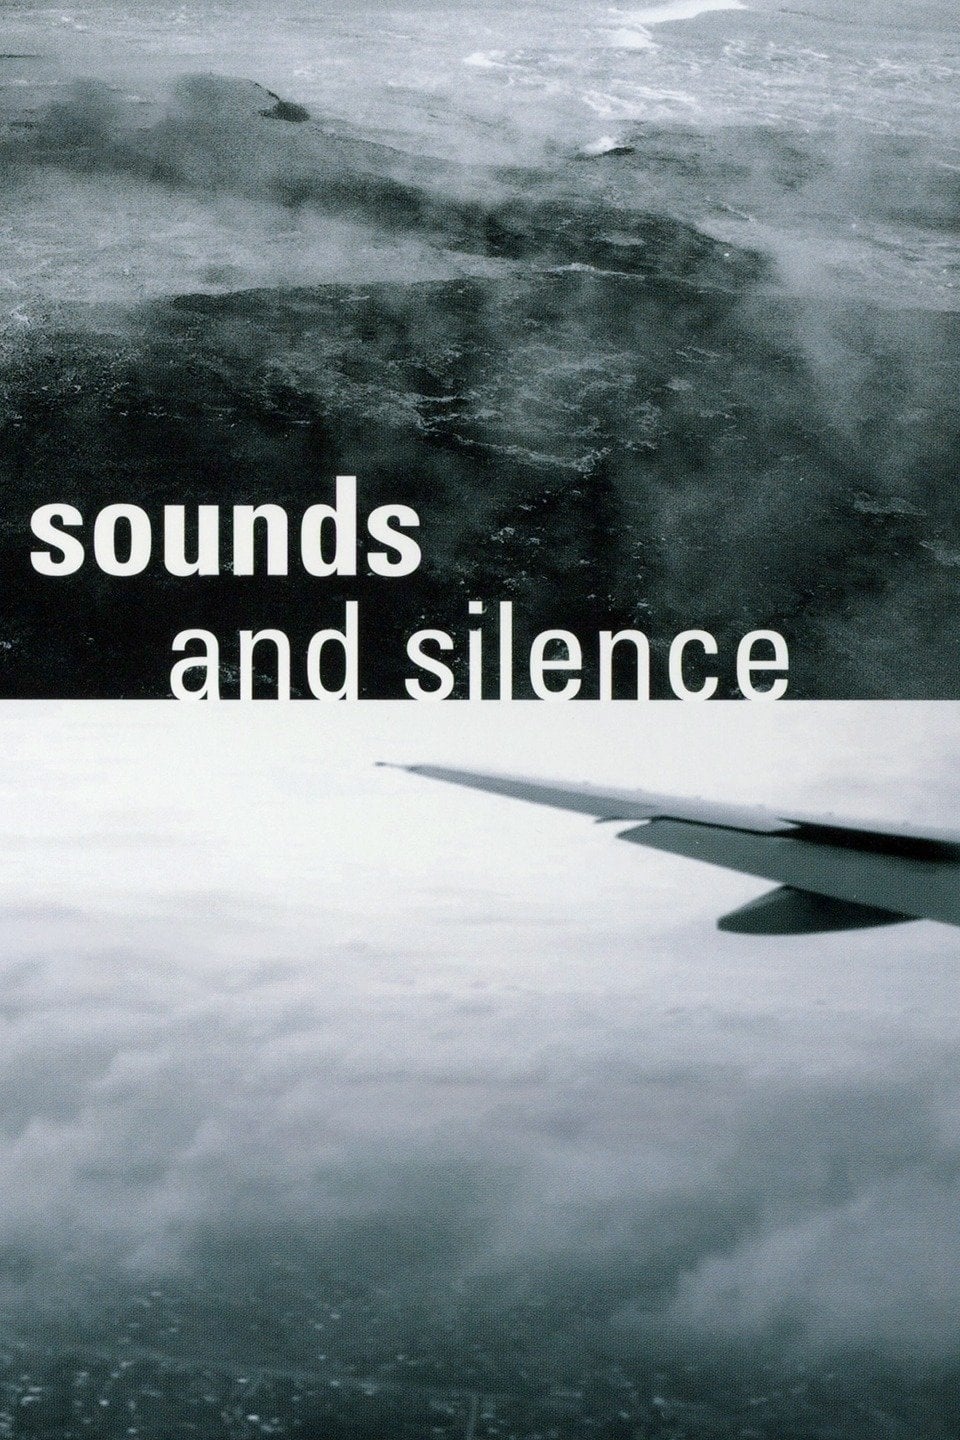 Sounds and Silence - Travels with Manfred Eicher